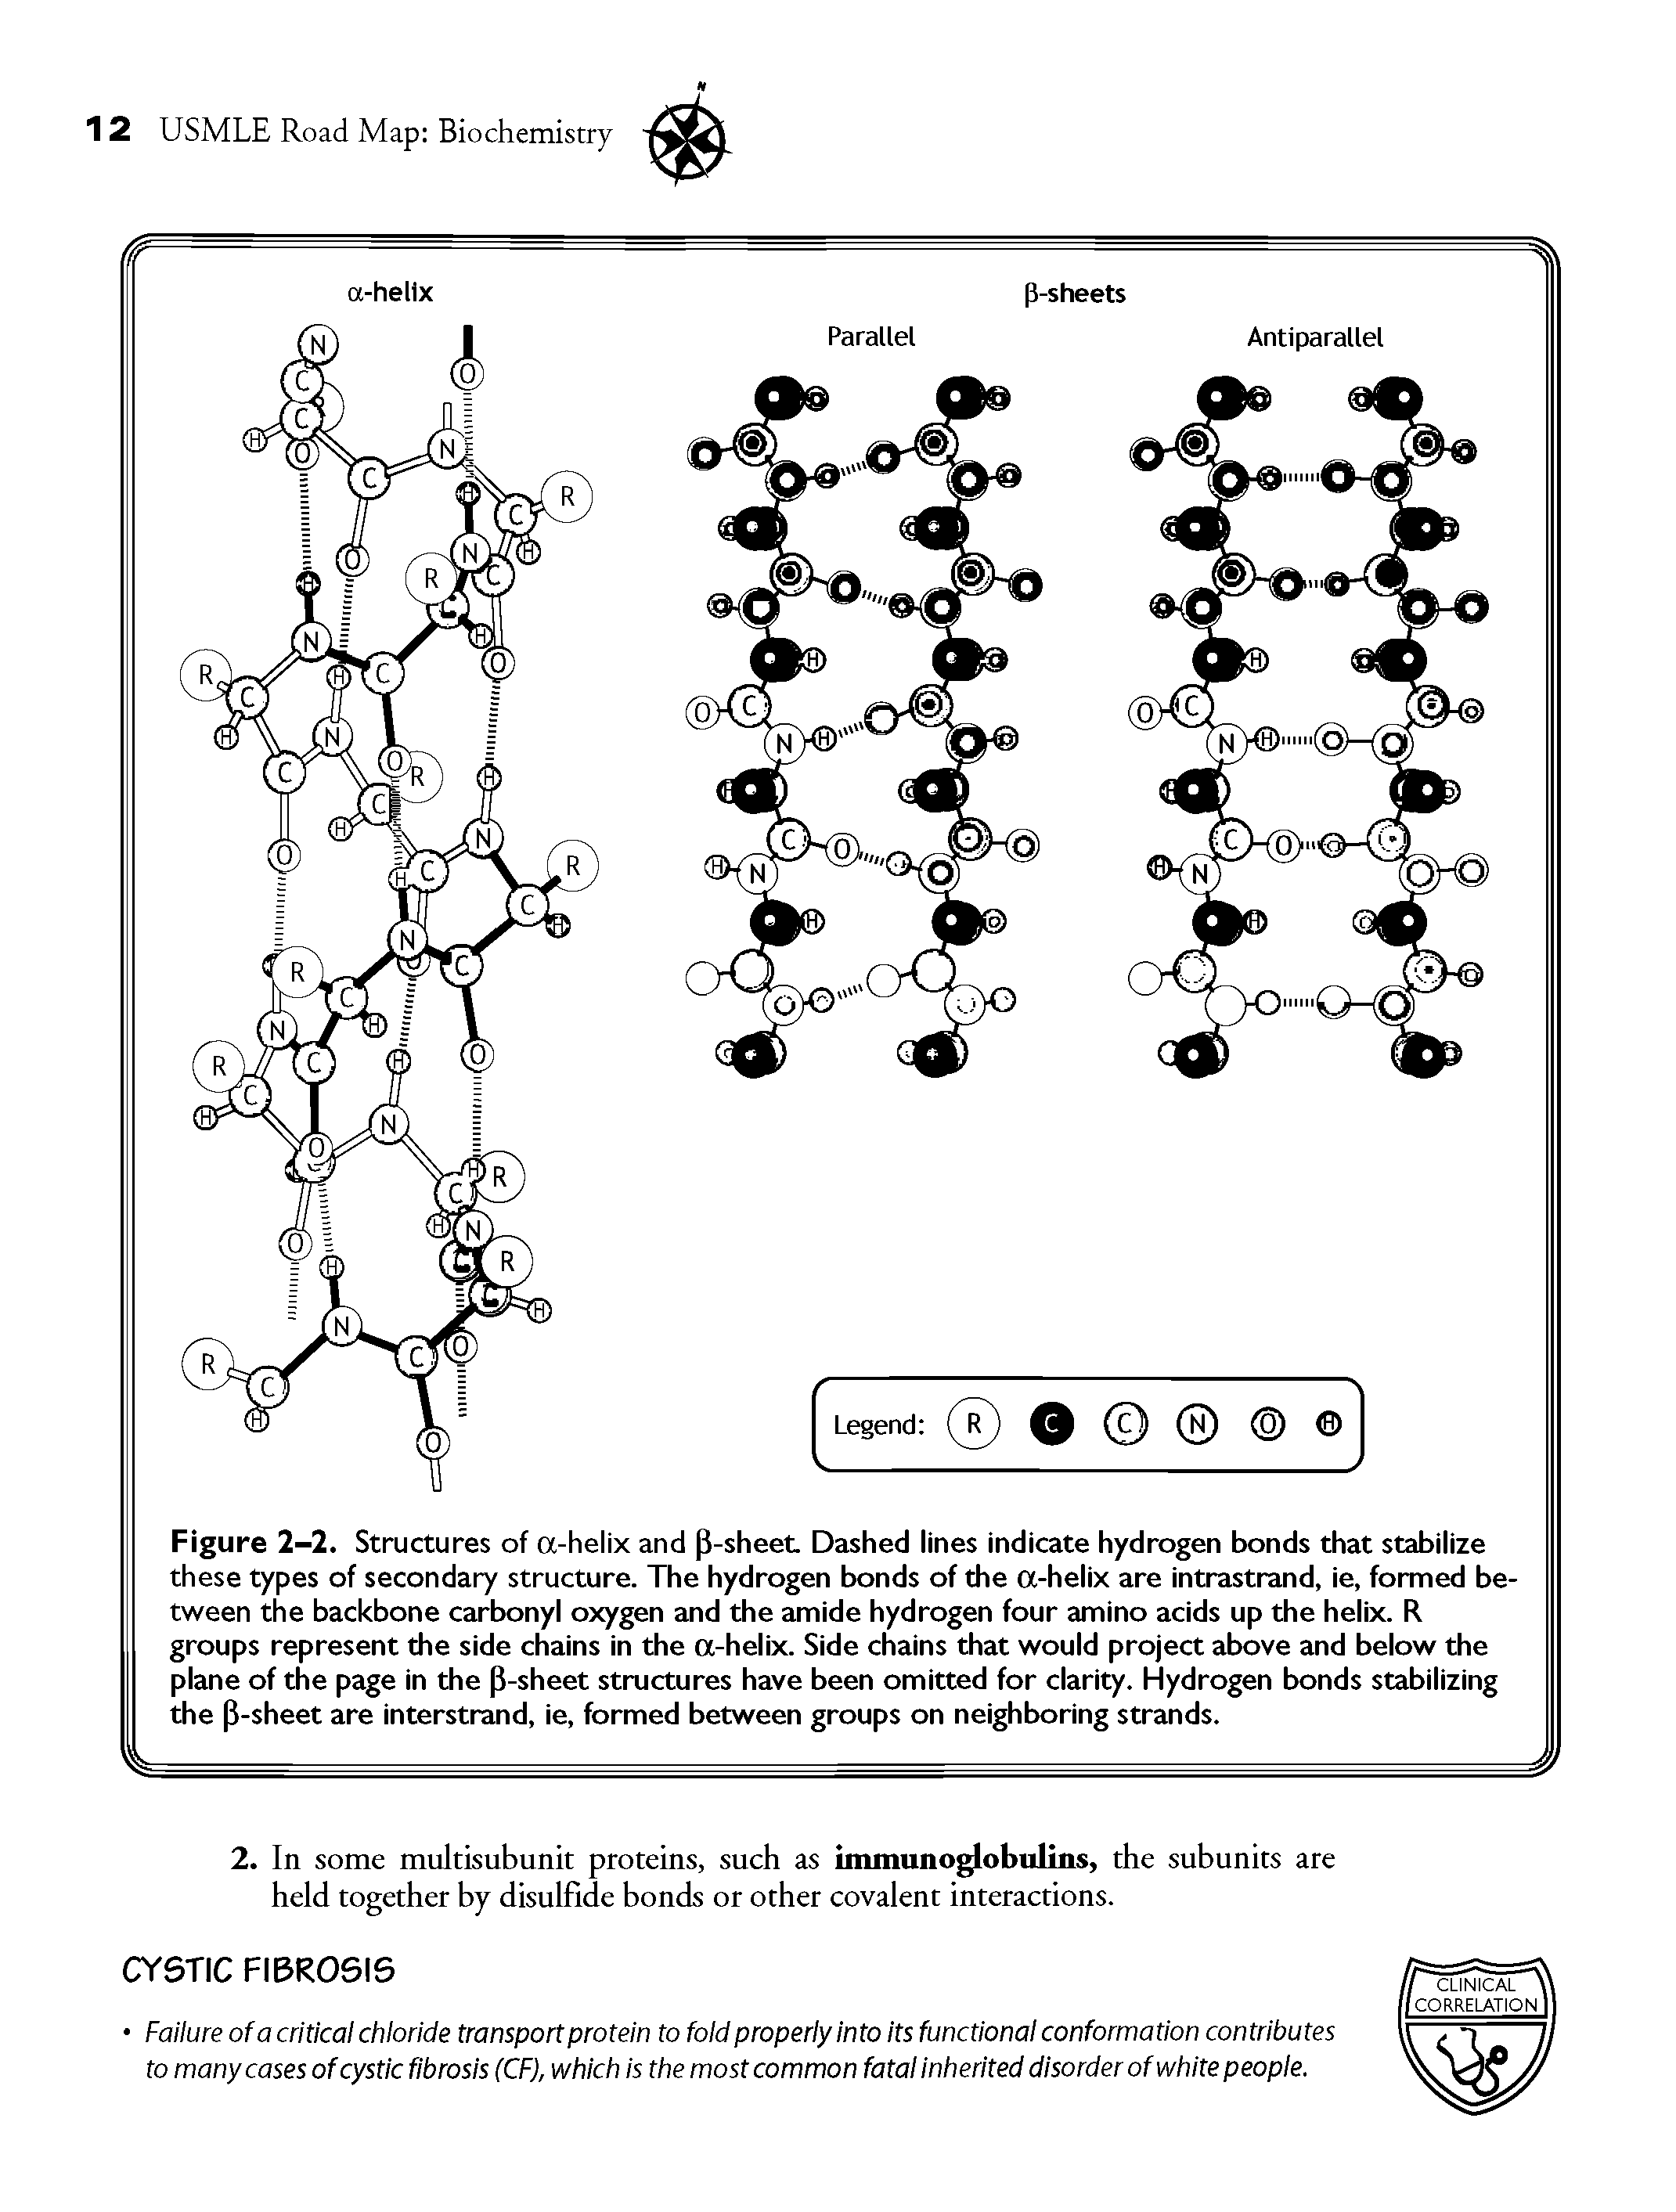 Figure 2-2. Structures of a-helix and P-sheet Dashed lines indicate hydrogen bonds that stabilize these types of secondary structure. The hydrogen bonds of the a-helix are intrastrand, ie, formed between the backbone carbonyl oxygen and the amide hydrogen four amino acids up the helix. R groups represent the side chains in the a-helix. Side chains that would project above and below the plane of the page in the P-sheet structures have been omitted for clarity. Hydrogen bonds stabilizing the p-sheet are interstrand, ie, formed between groups on neighboring strands.